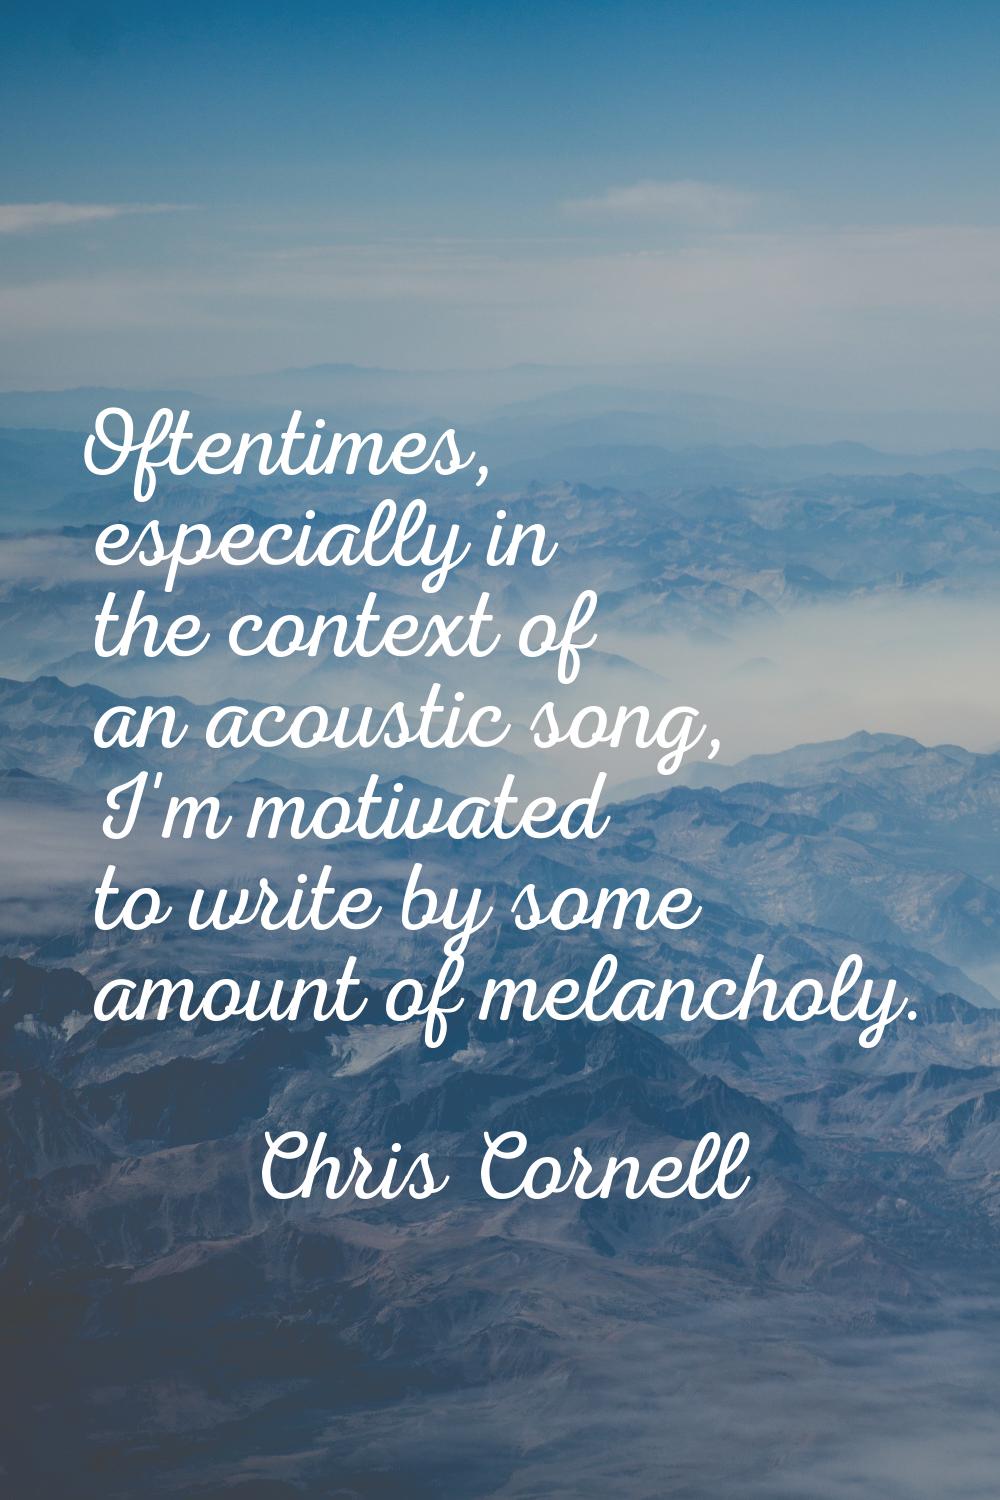 Oftentimes, especially in the context of an acoustic song, I'm motivated to write by some amount of